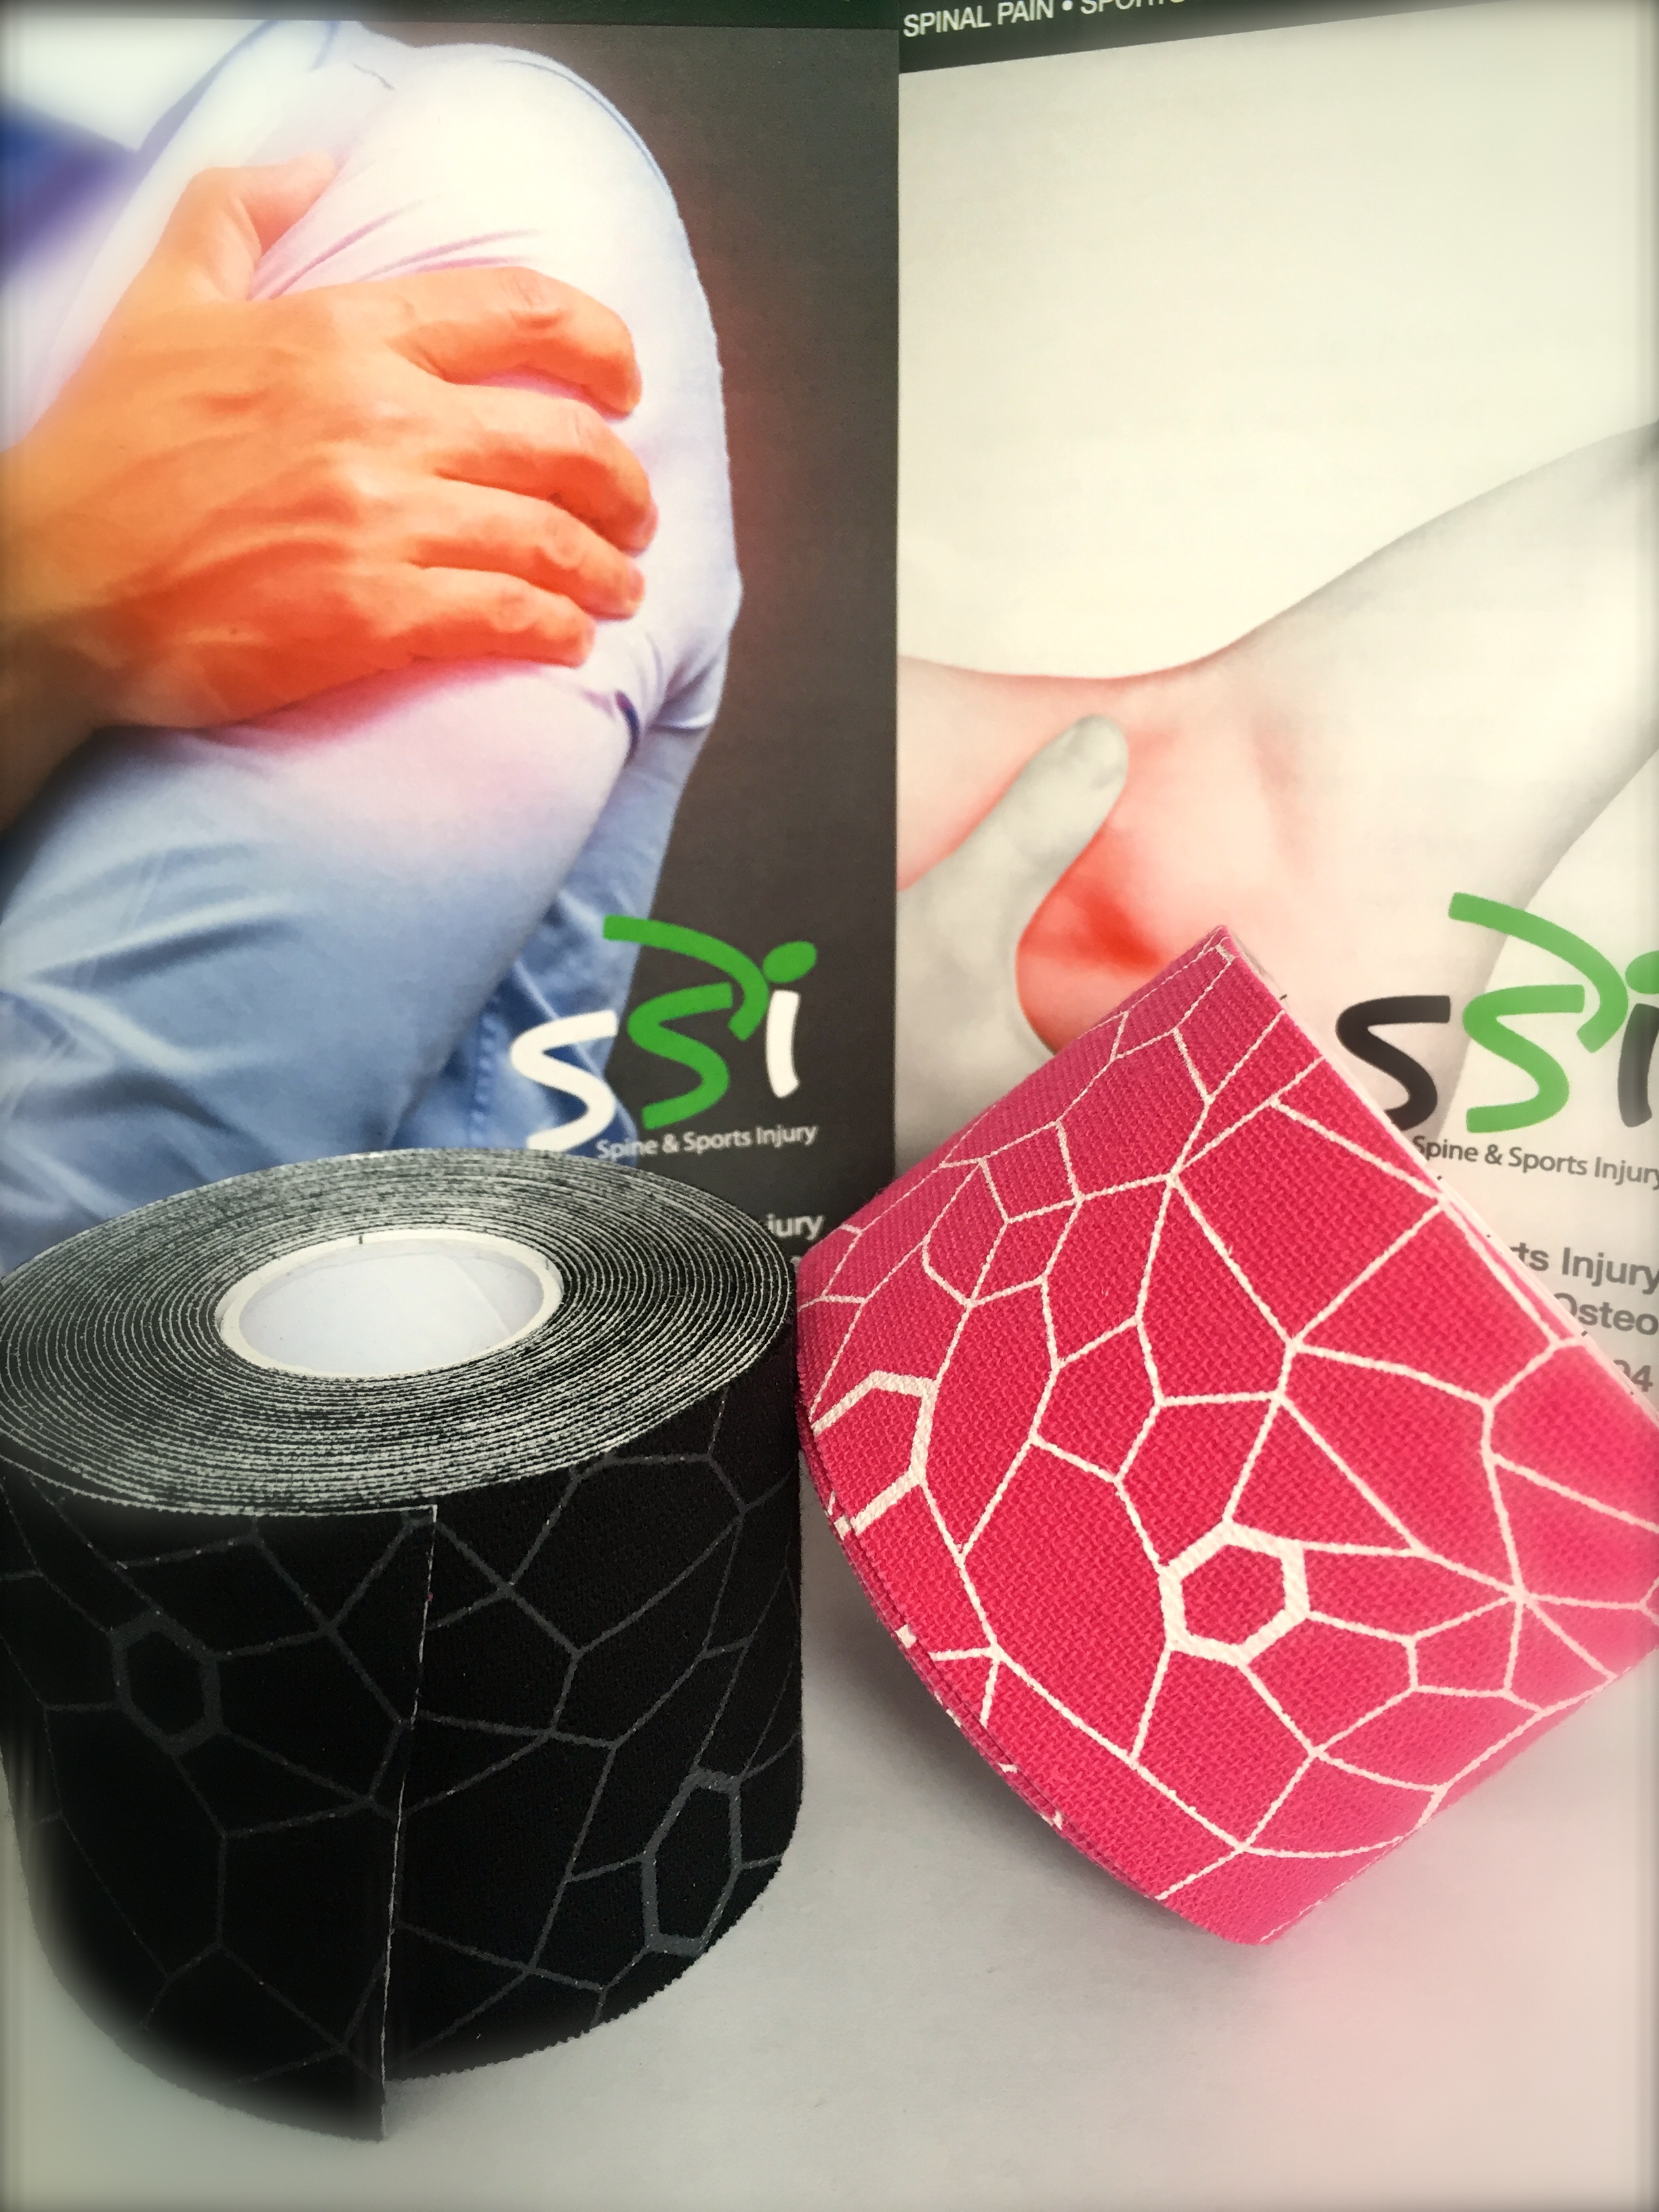 Spine and Sports Injury Sports Tape